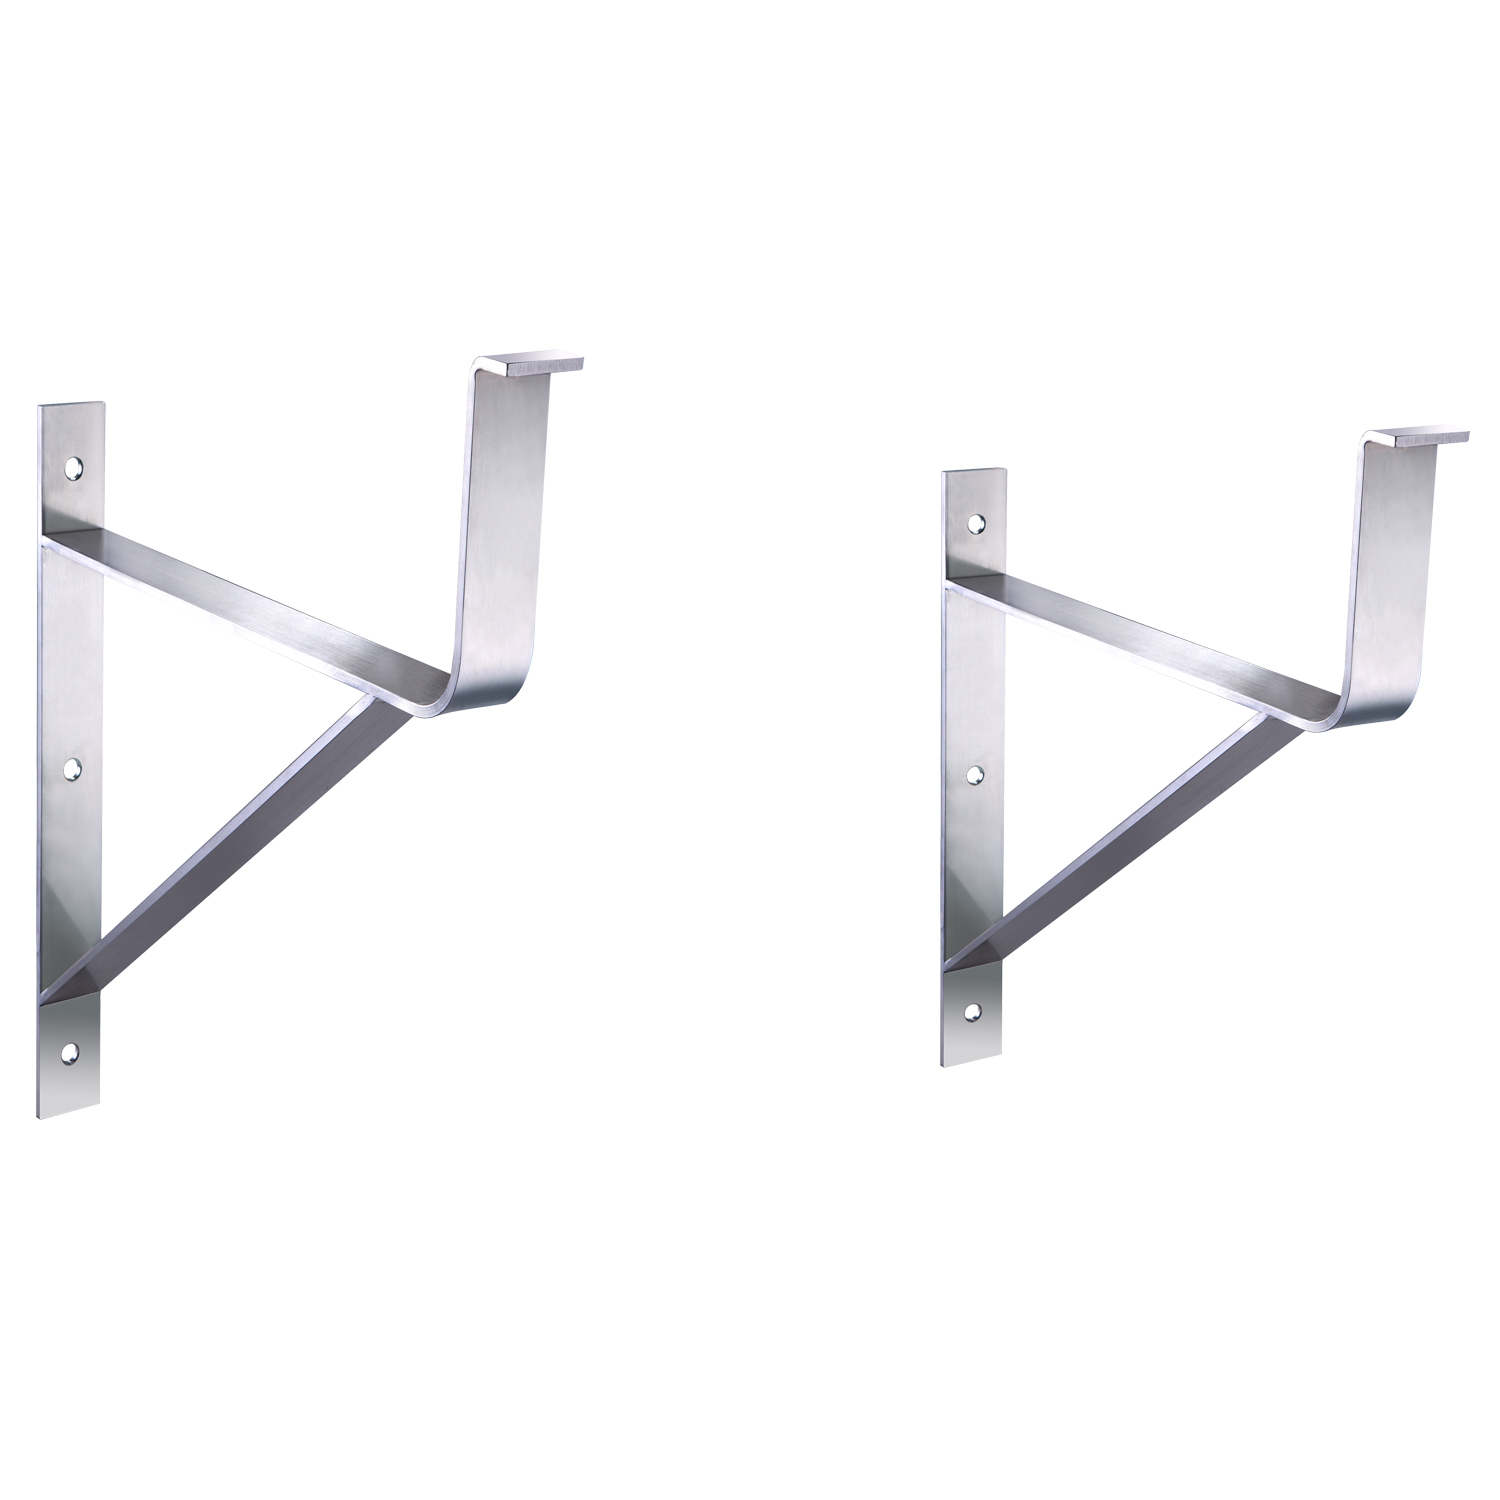 Additional Wall Mount Brackets for Extra Support. For use with WHNCD72